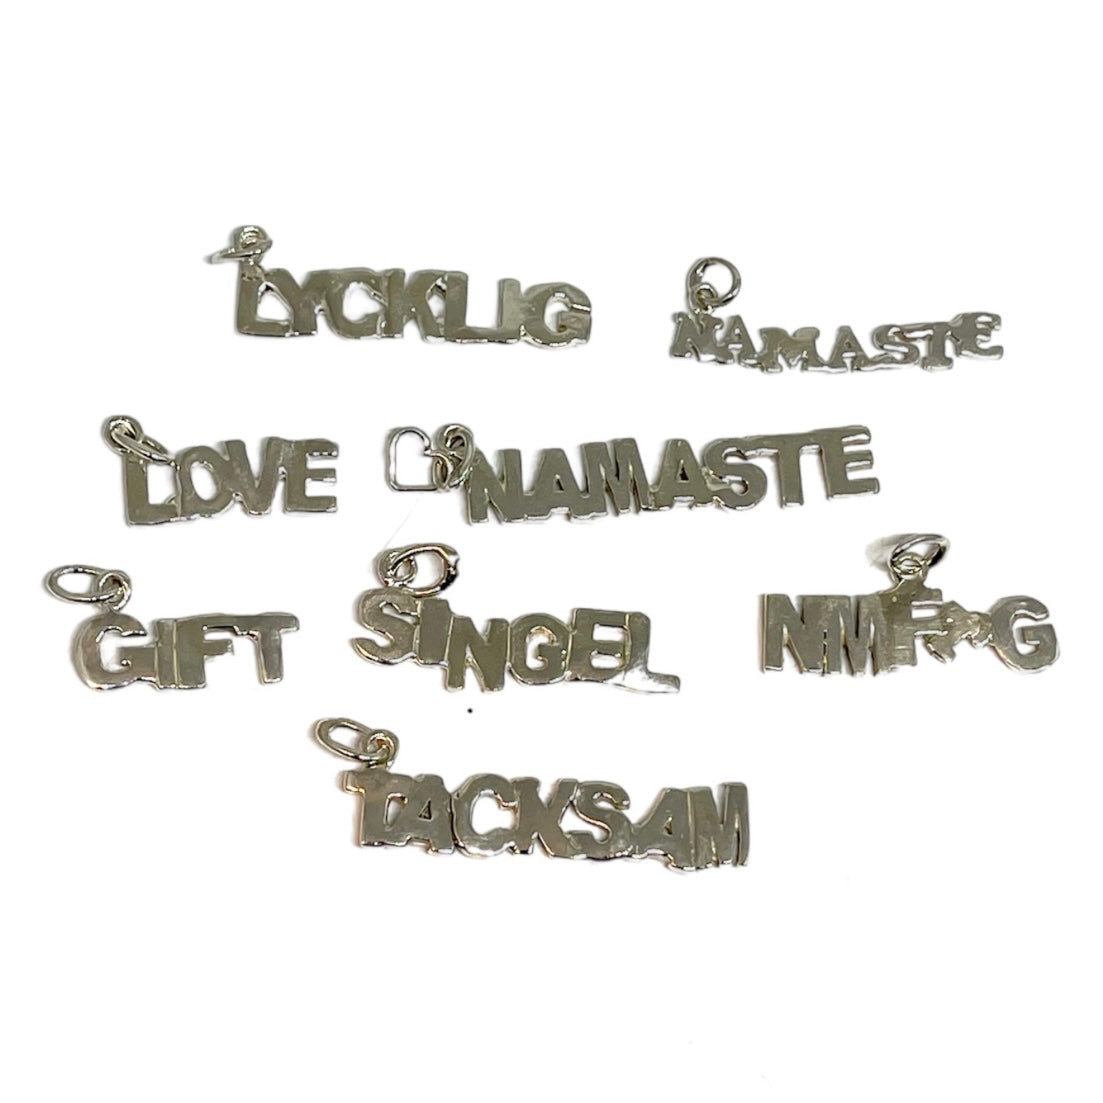 Fitted necklace with word charms